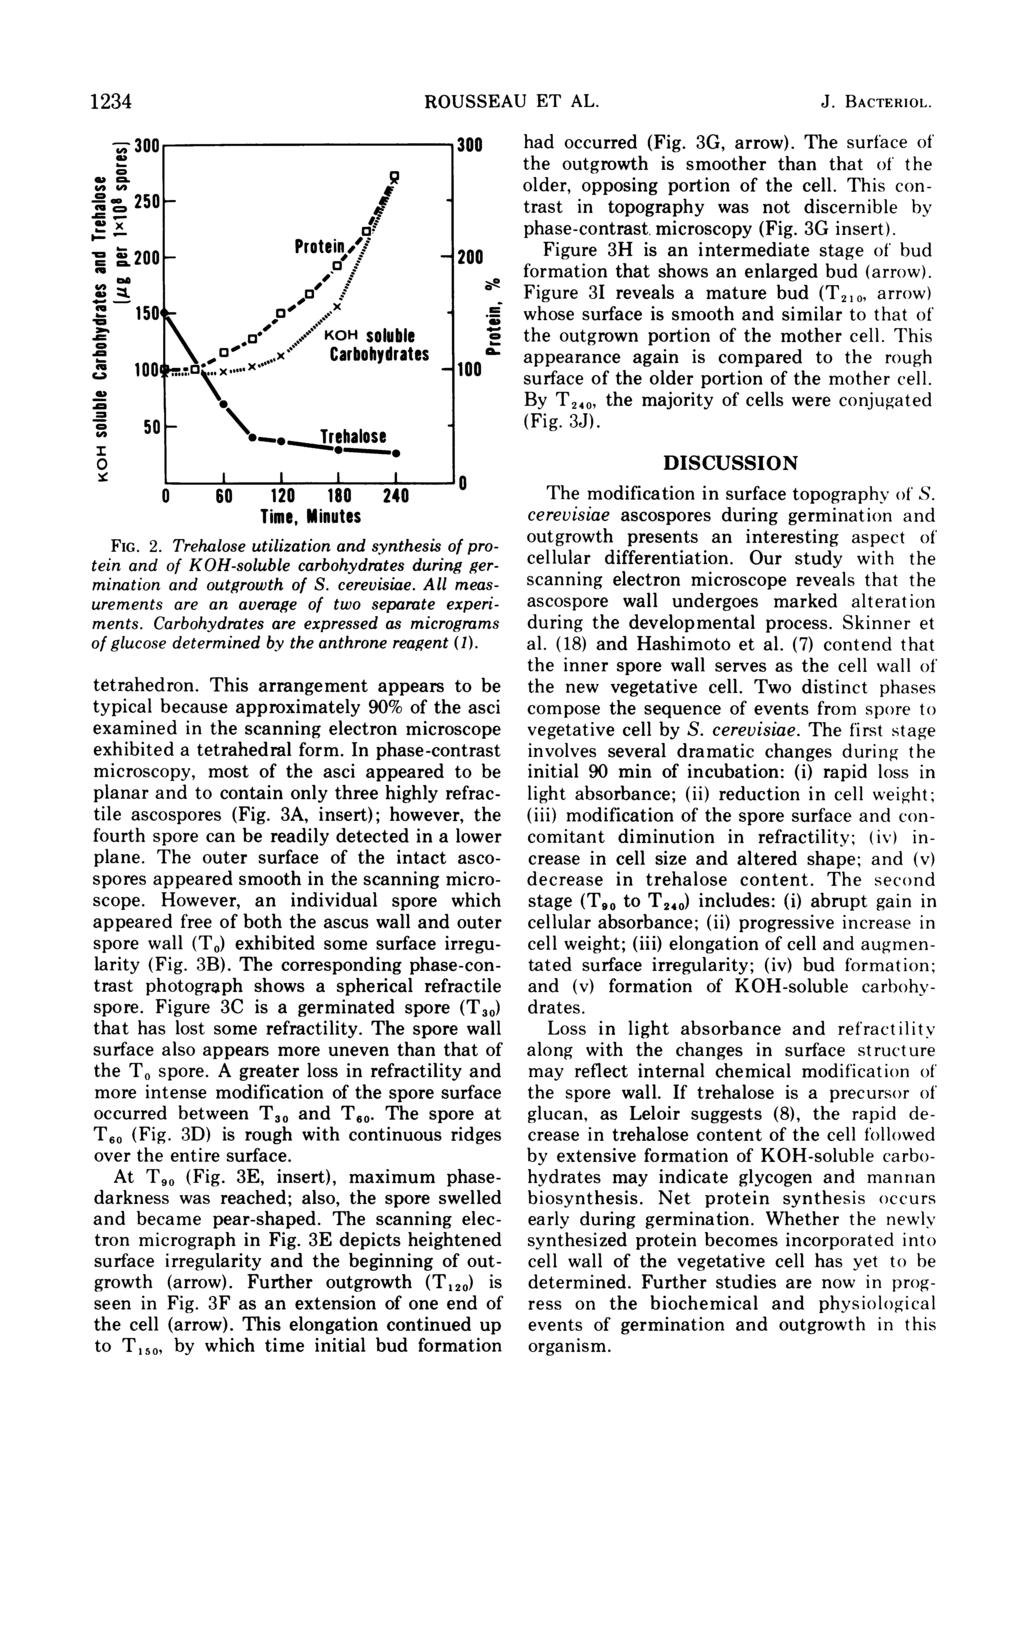 1234 ROUSSEAU ET AL. J. BACTERIOL. Time, Minutes FIG. 2. Trehalose utilization and synthesis of protein and of KOH-soluble carbohydrates during germination and outgrowth of S. cerevisiae.